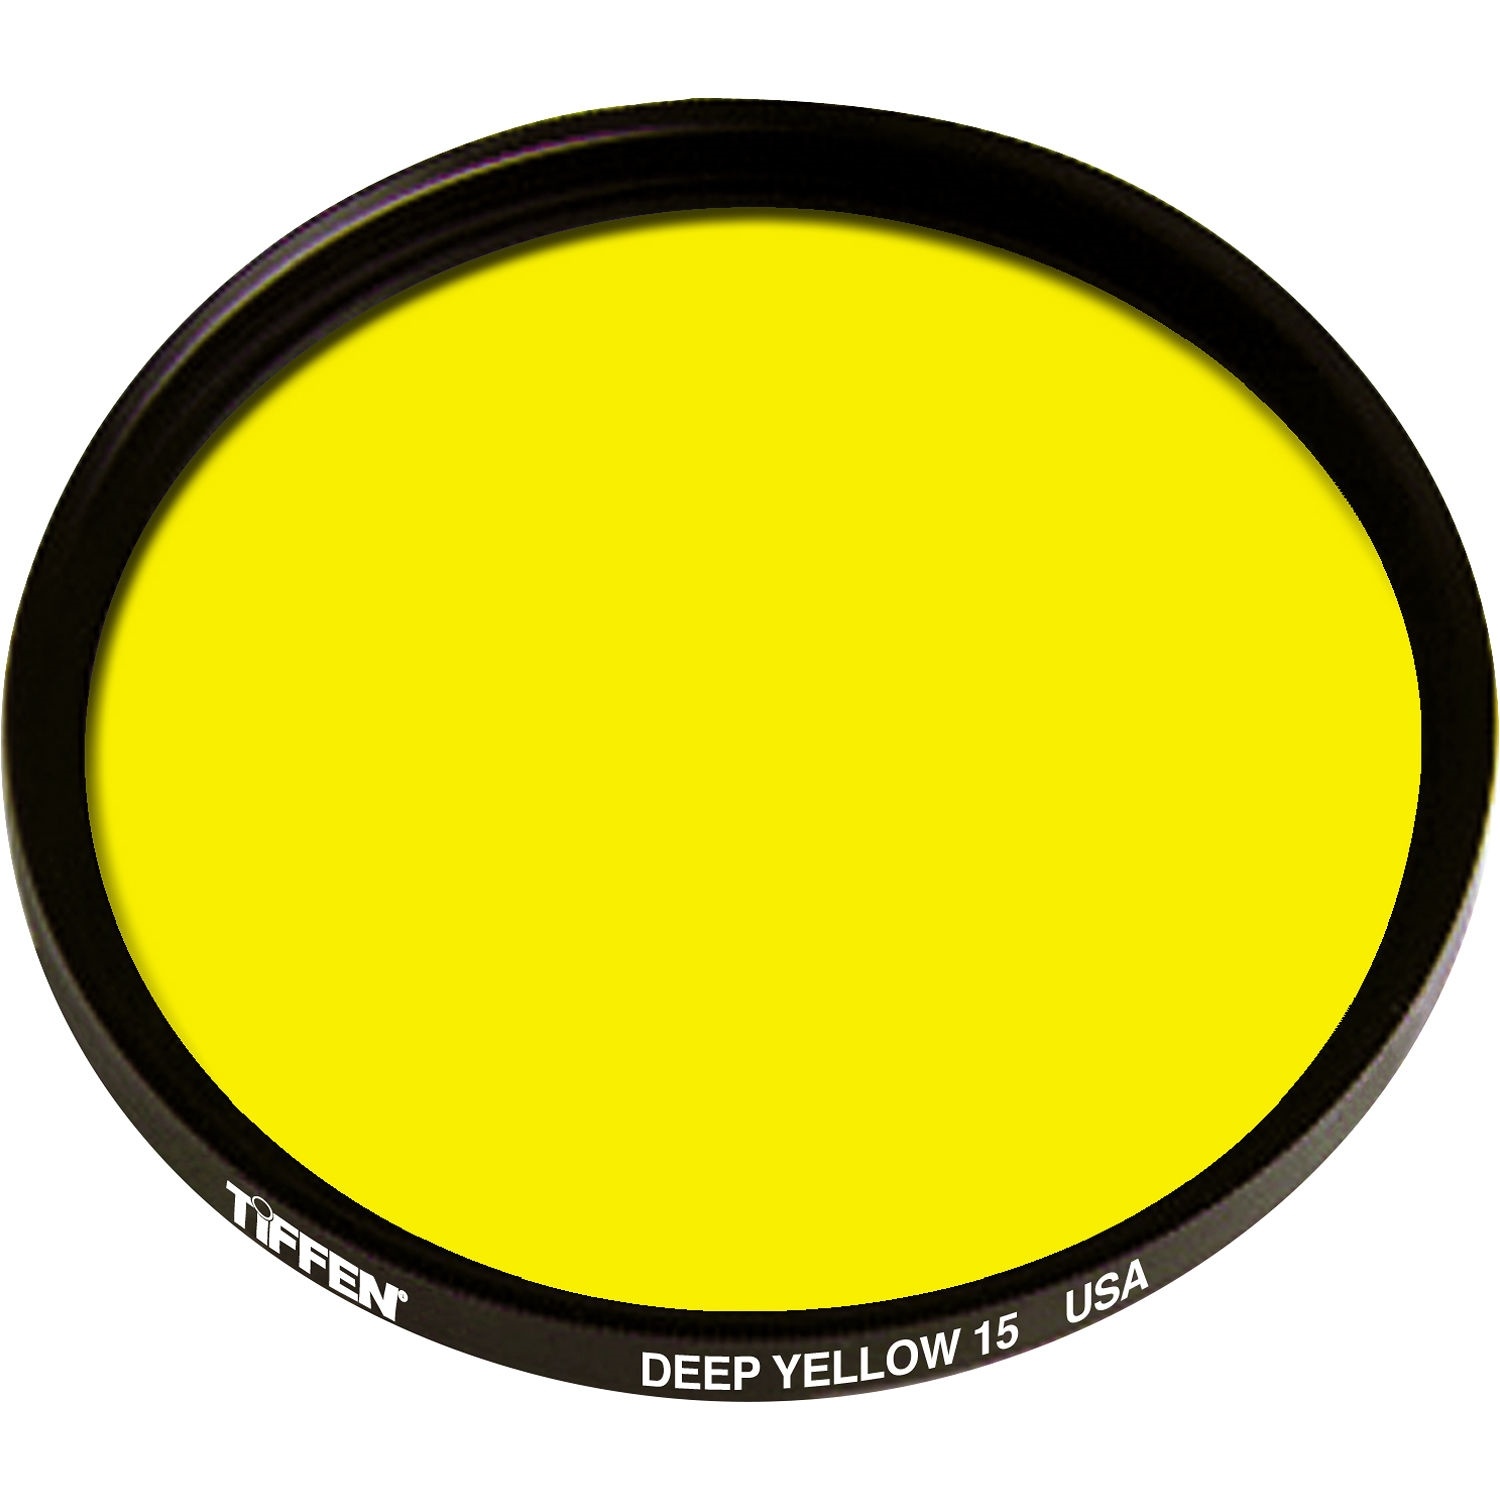 Tiffen 67mm Deep Yellow 15 Glass Filter for Black & White Film